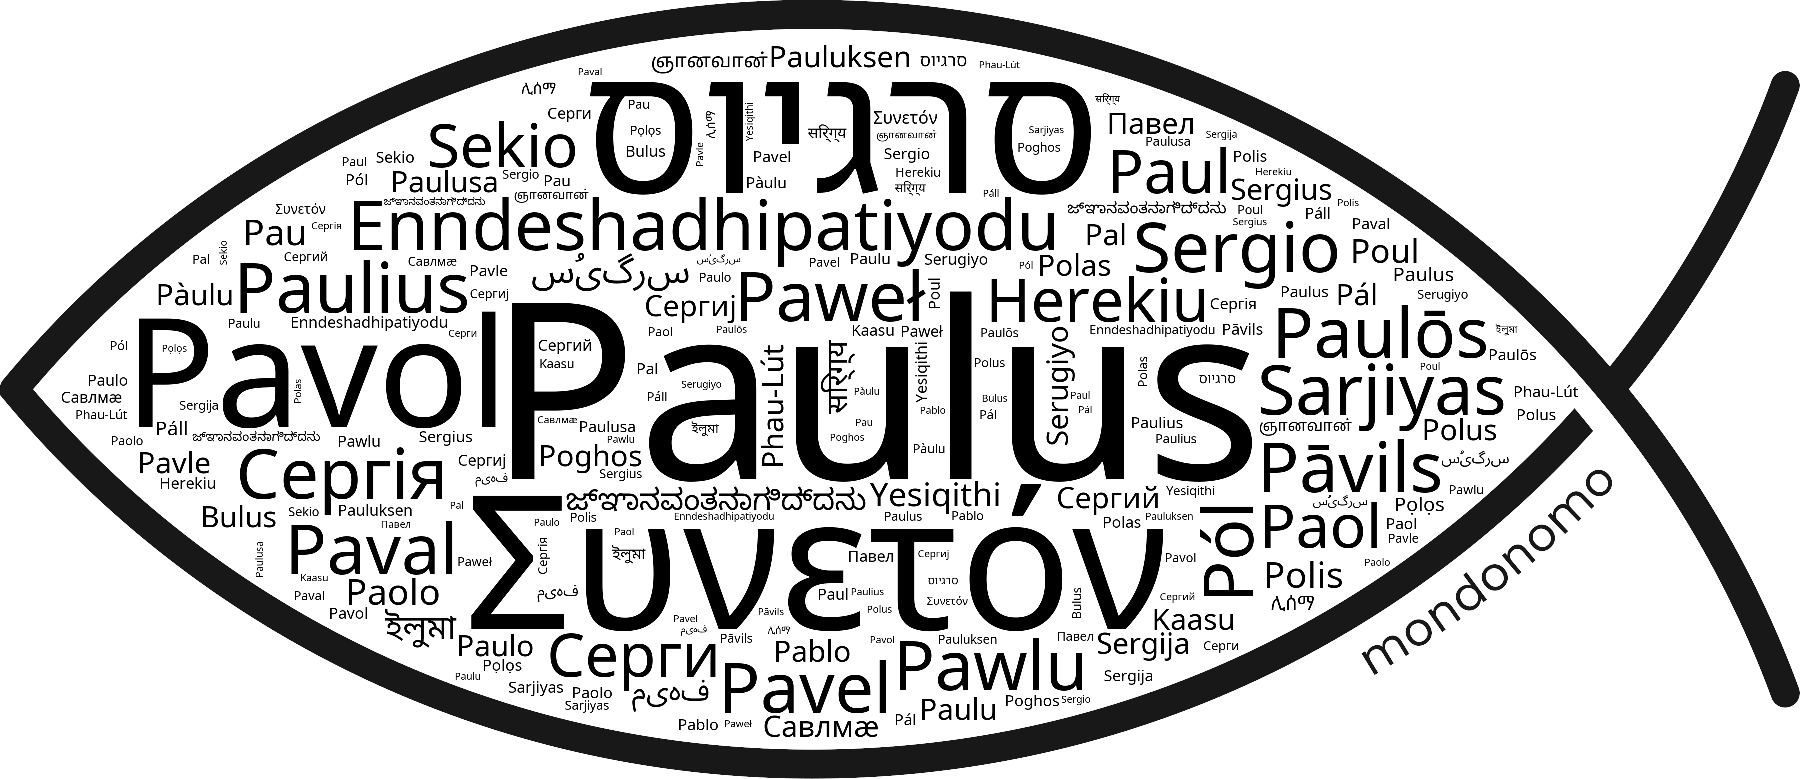 Name Paulus in the world's Bibles